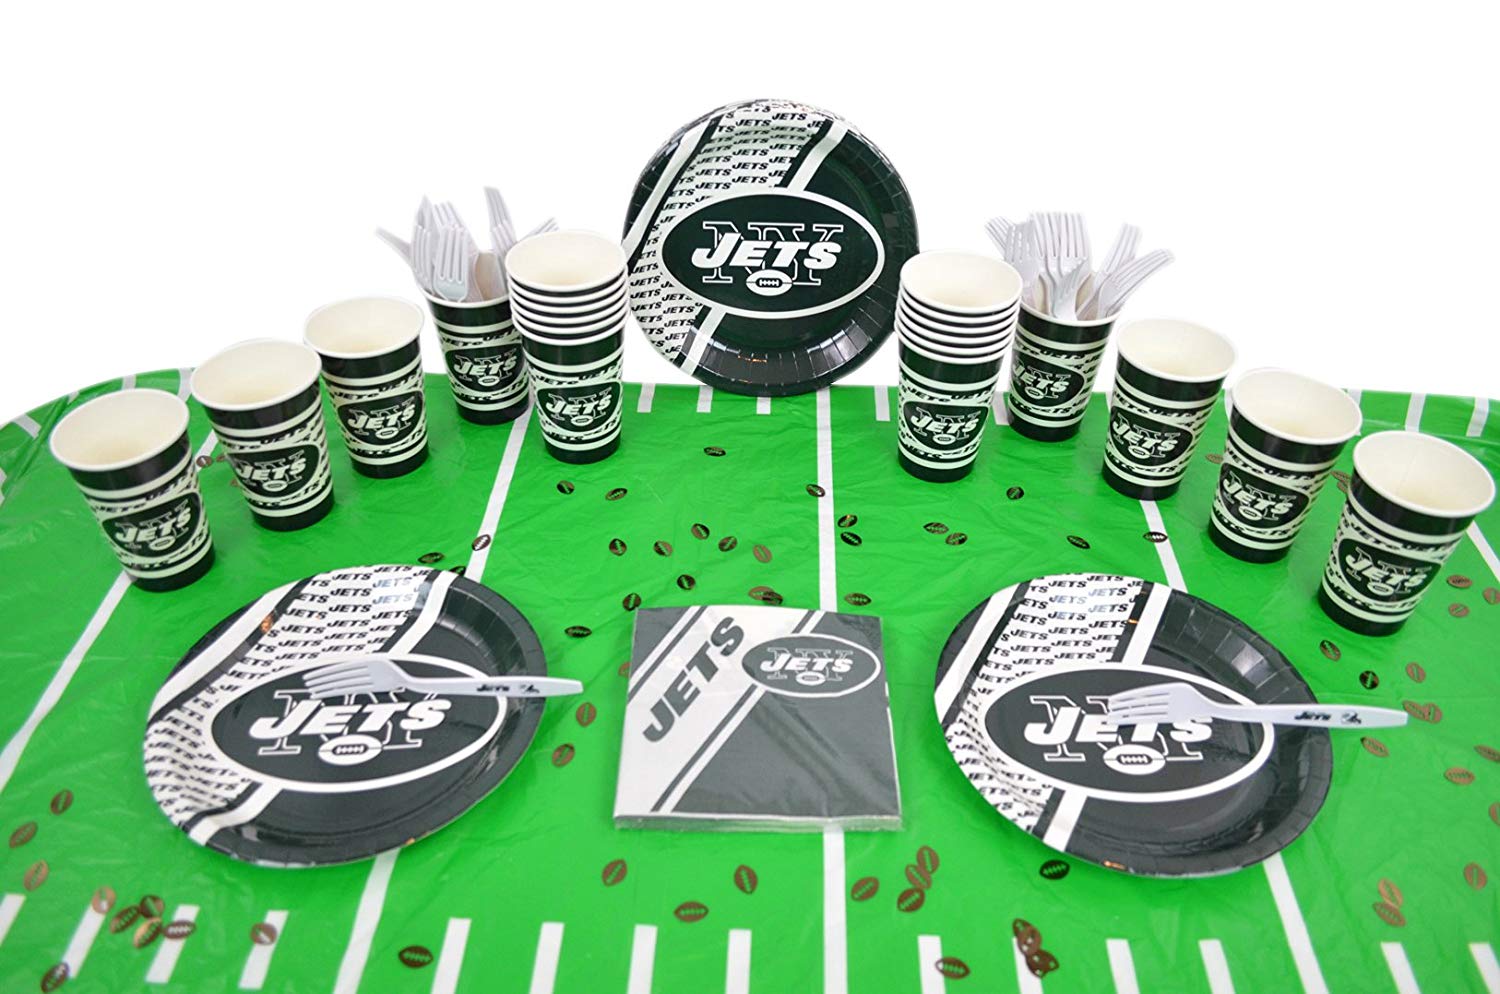 Duck House Official National Football Fan Shop Authentic NFL Tailgate Party Kit Bundle for 20 Fans - Table Setting and More